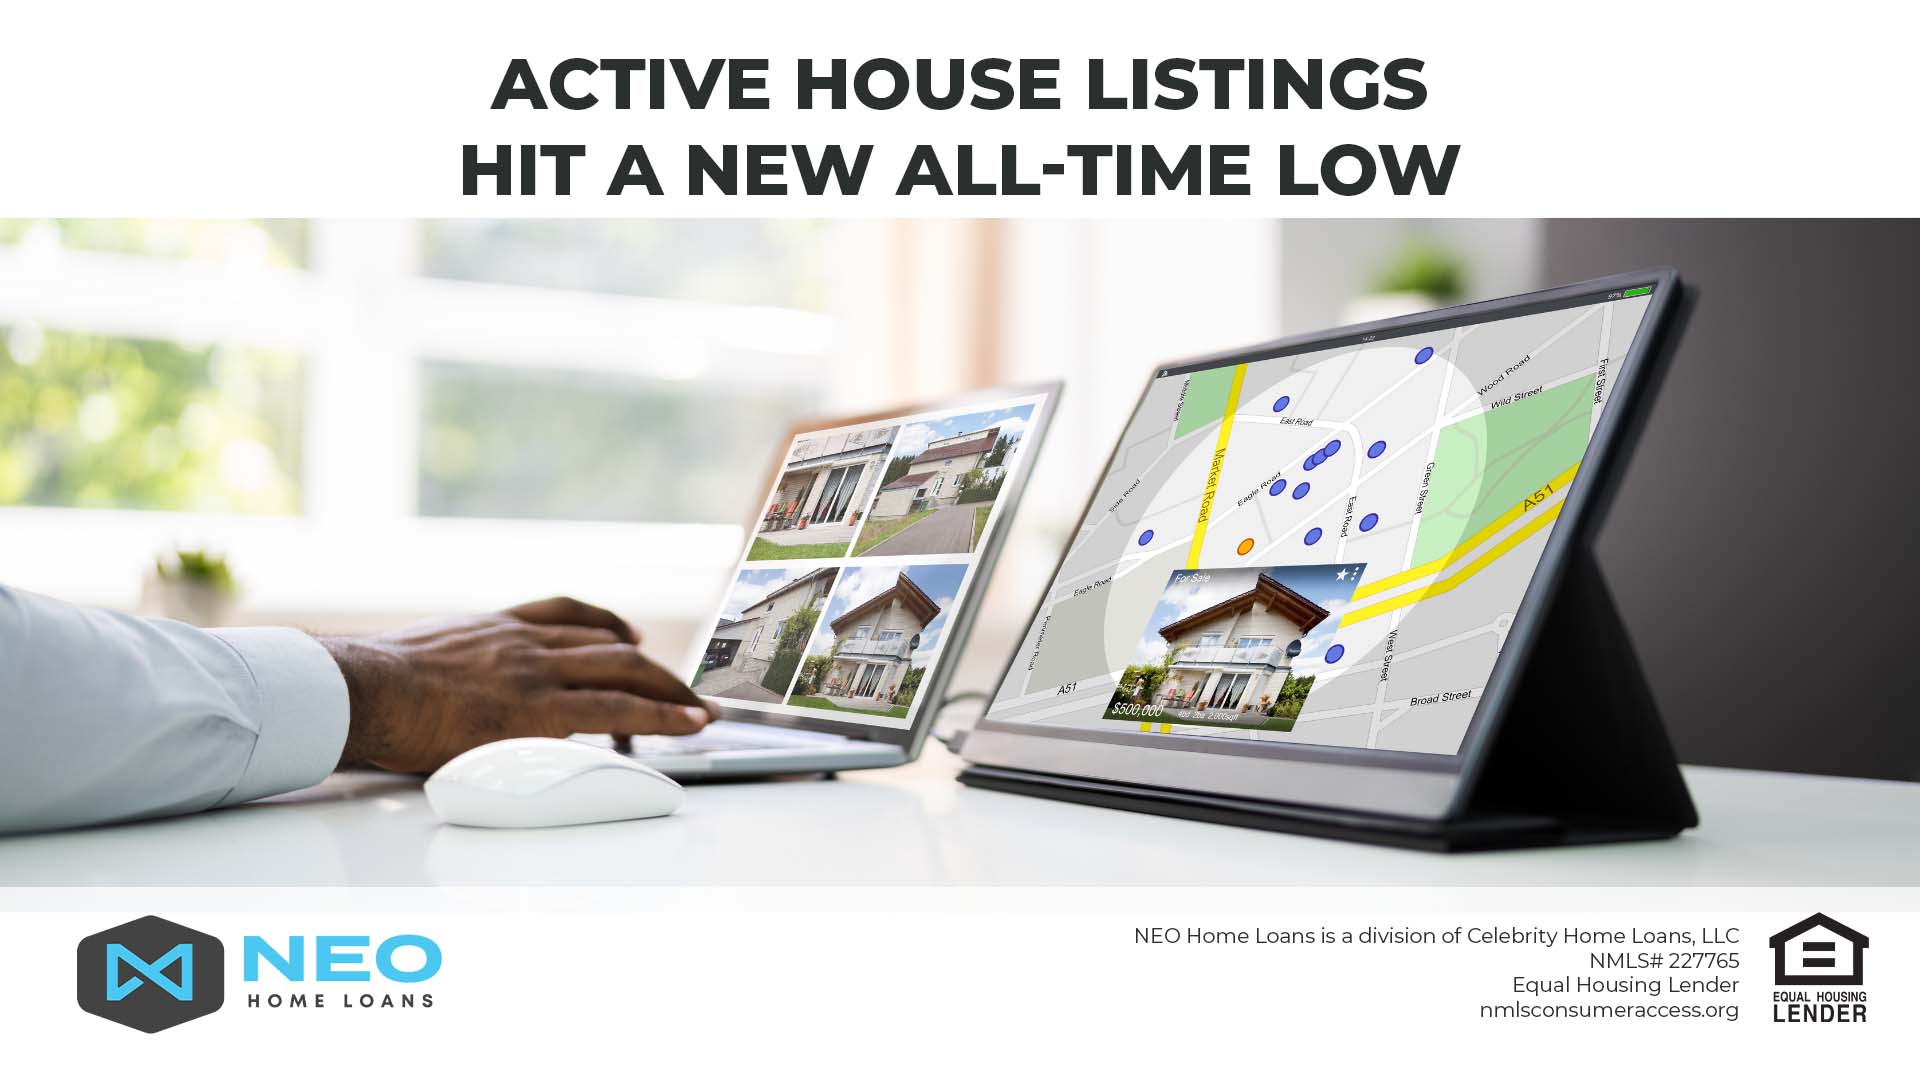 Active House Listings Hit a New All-Time Low